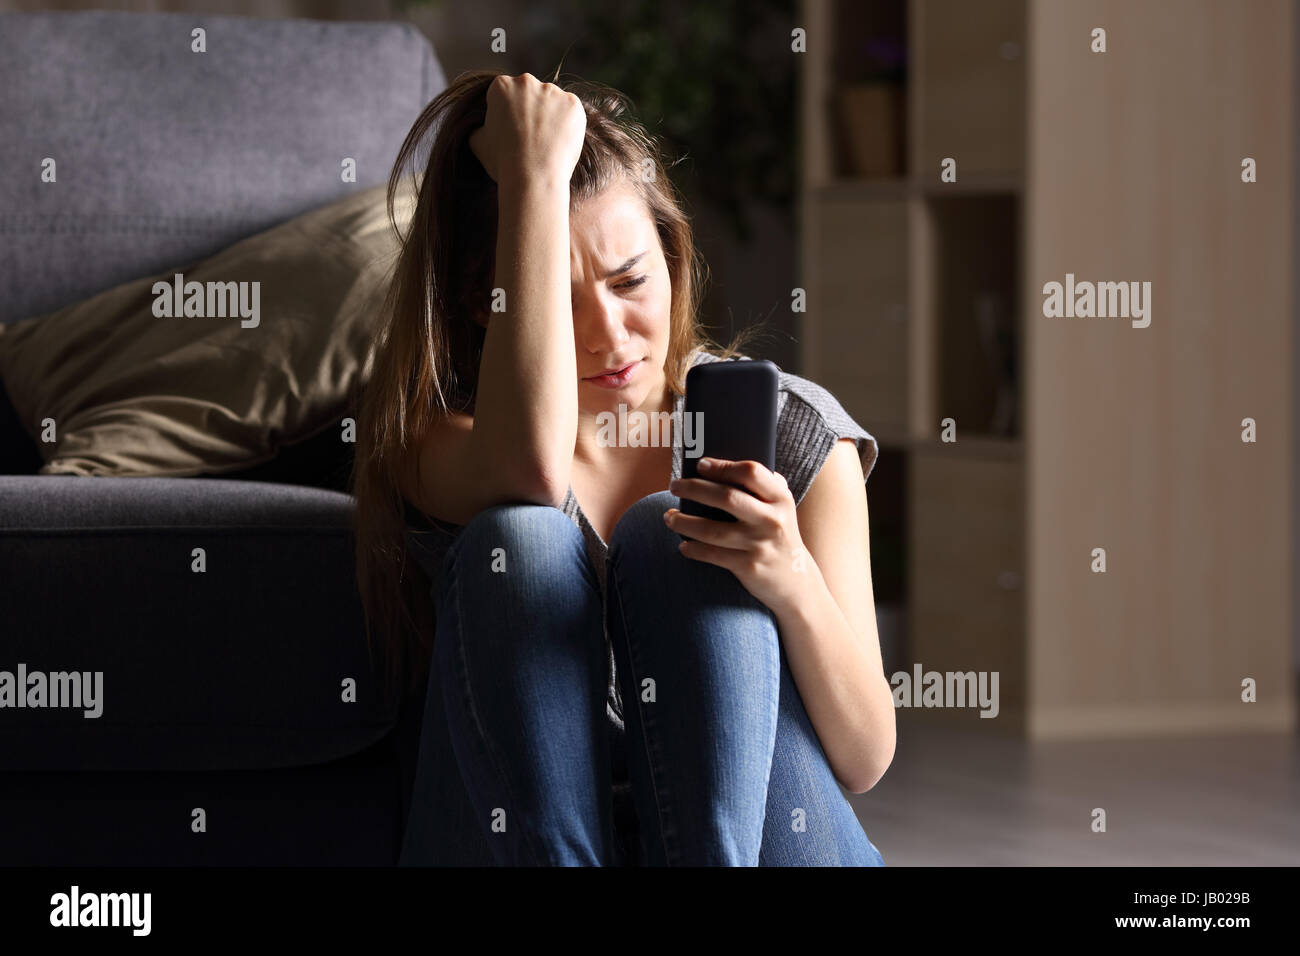 Front view of a sad teen checking phone sitting on the floor in the living room at home with a dark background Stock Photo